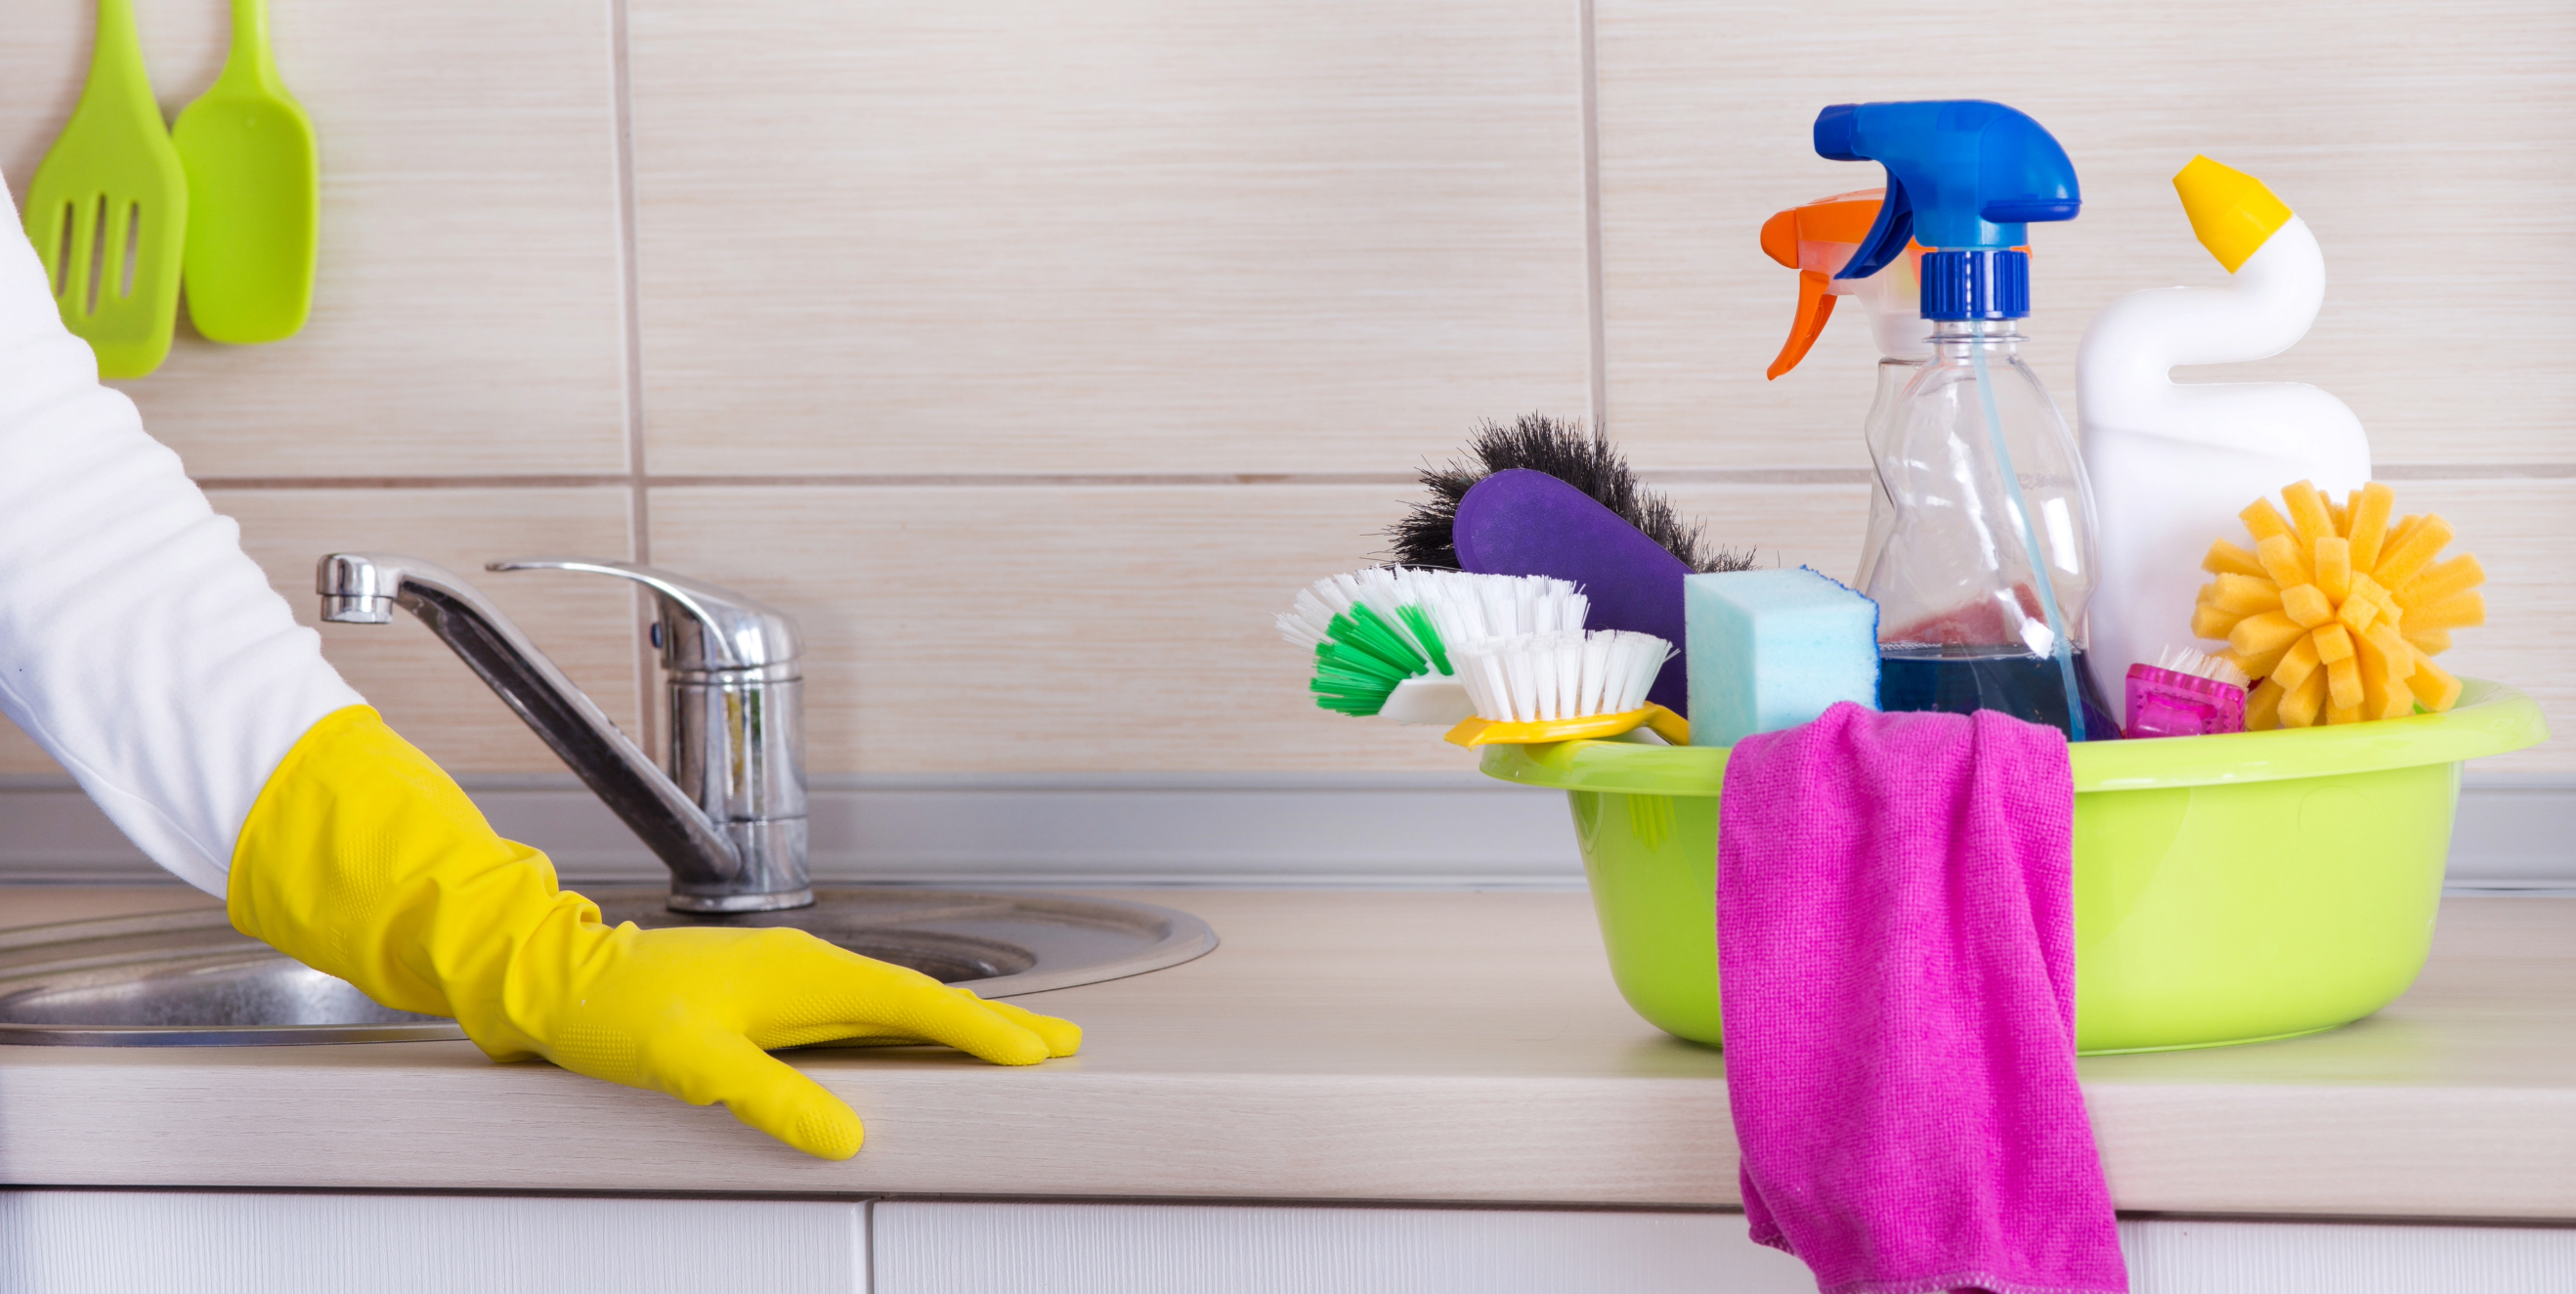 Cleaning ladies tools: rubber glove and cleaning supplies